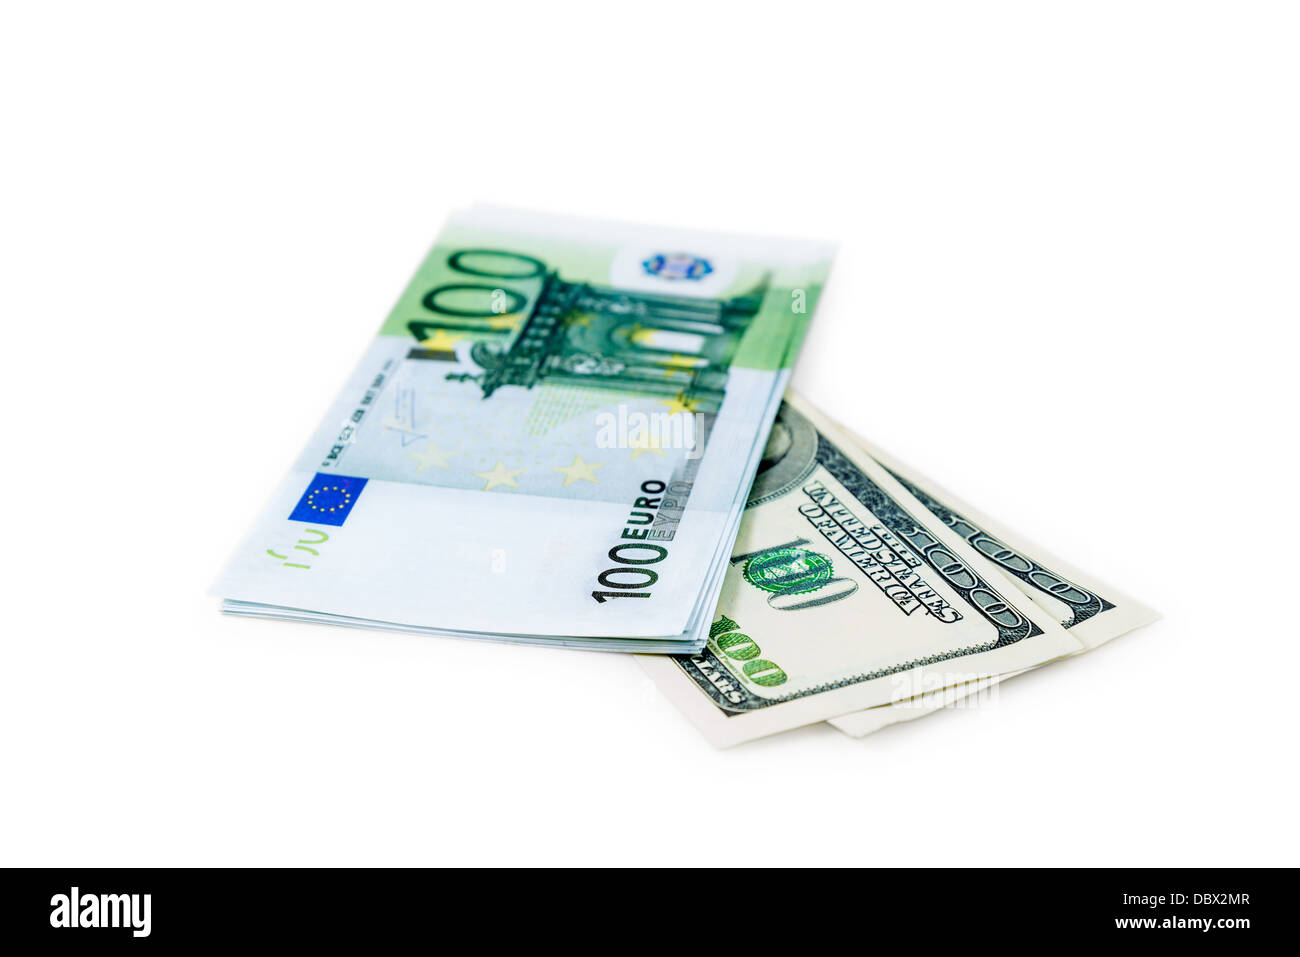 Paper currency of 100 dollars and euro are photographed on a white background Stock Photo